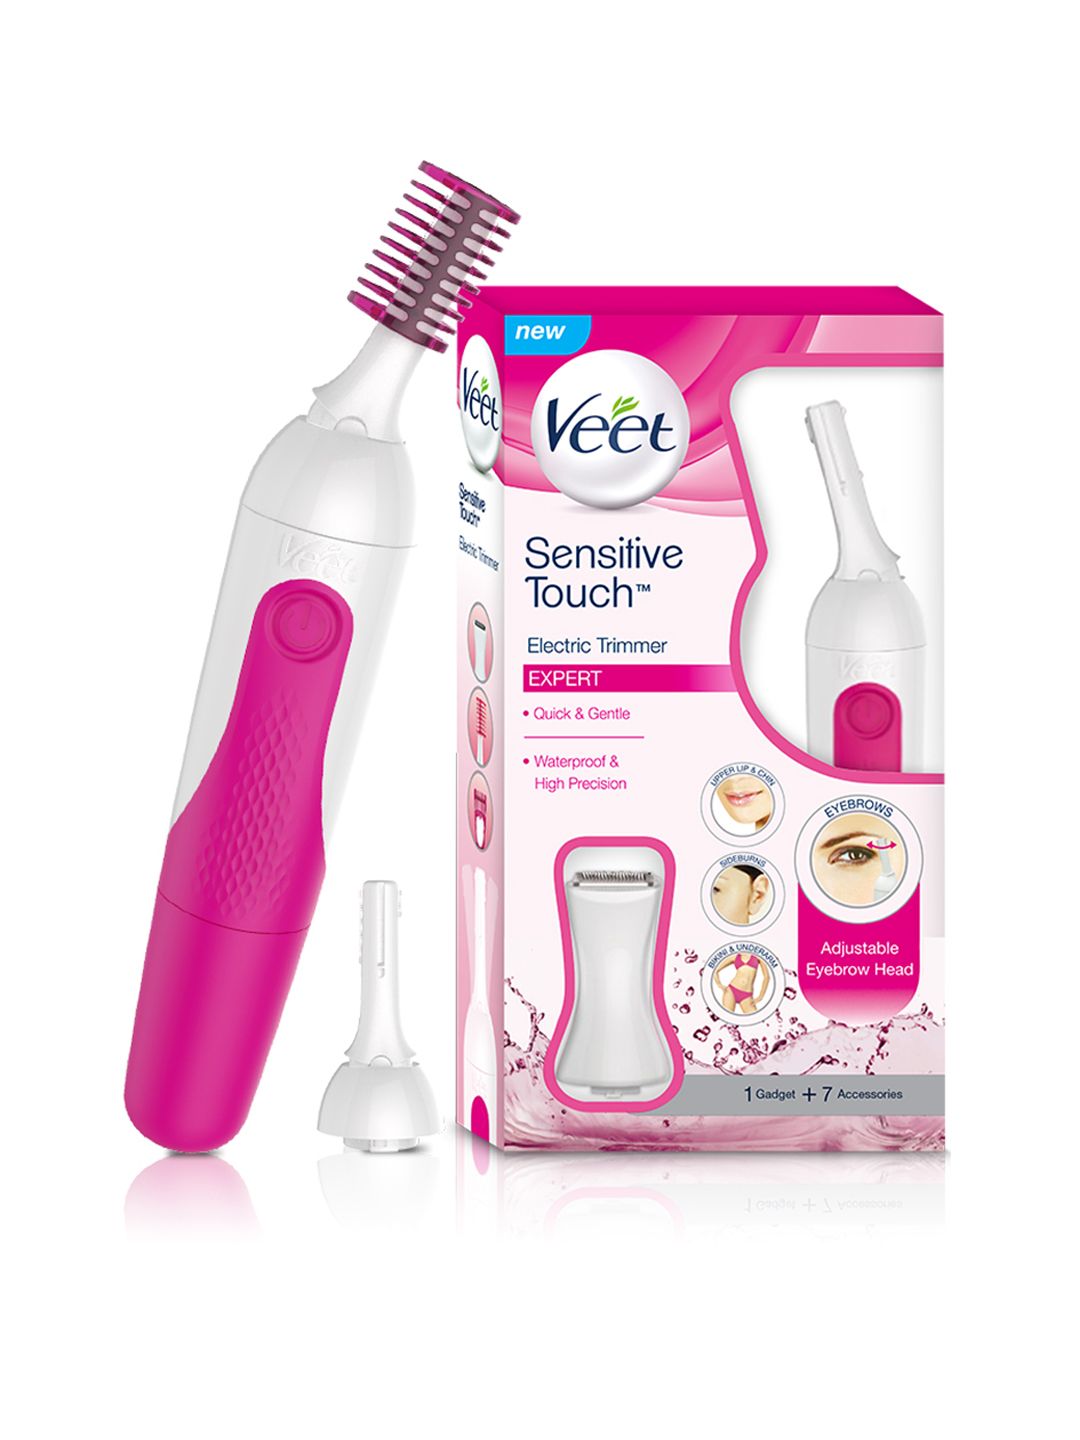 Veet Women Sensitive Touch Expert Electric Hair Trimmer - Pink & White Price in India